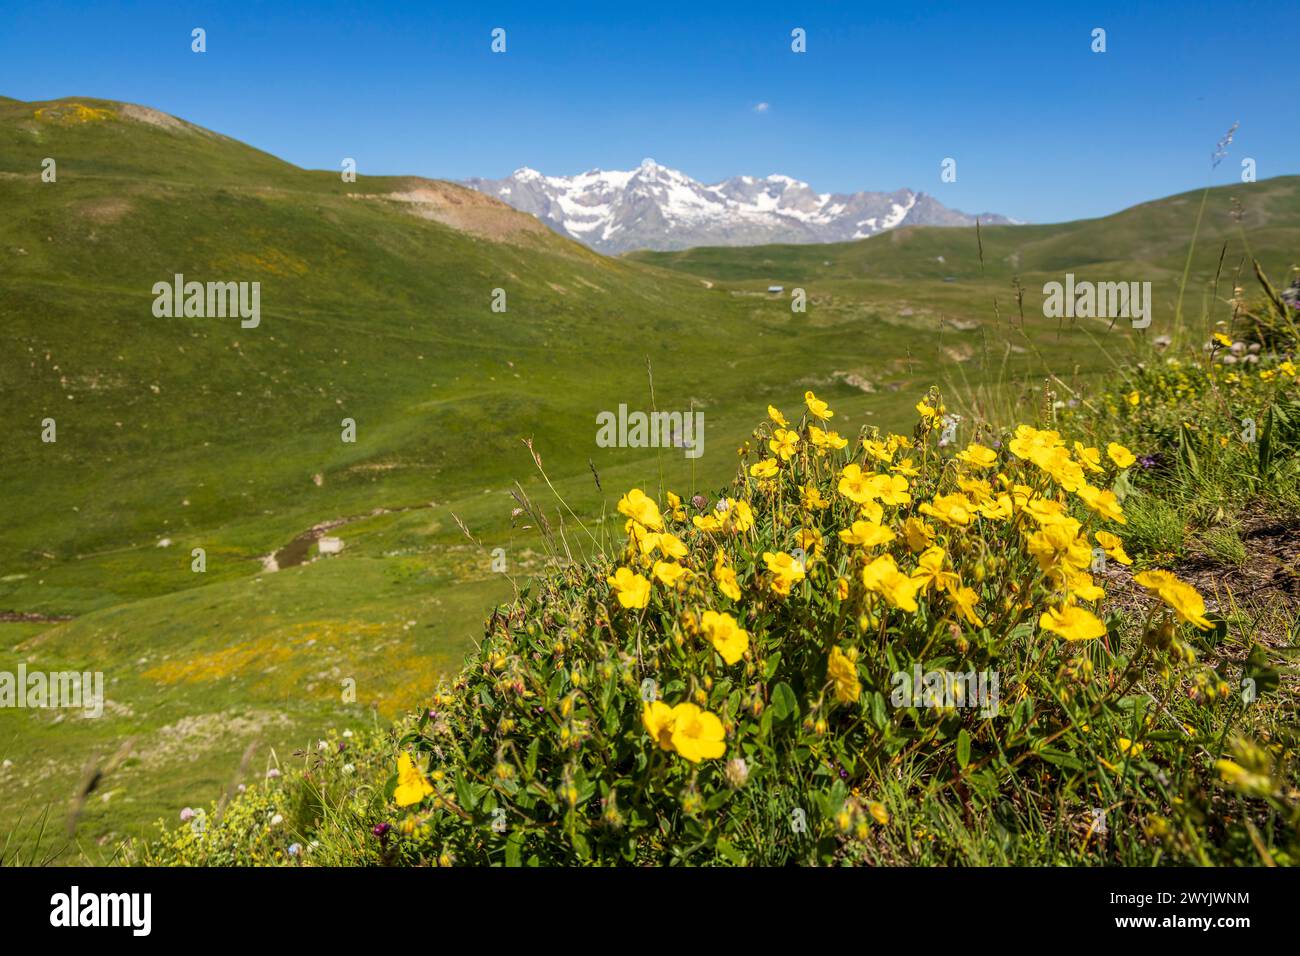 France, Hautes-Alpes, la Grave, Emparis plateau, Rif Tort valley, flowers of Rock-rose (Helianthemum grandiflorum), the summits of the Grandes Rousses in the background Stock Photo